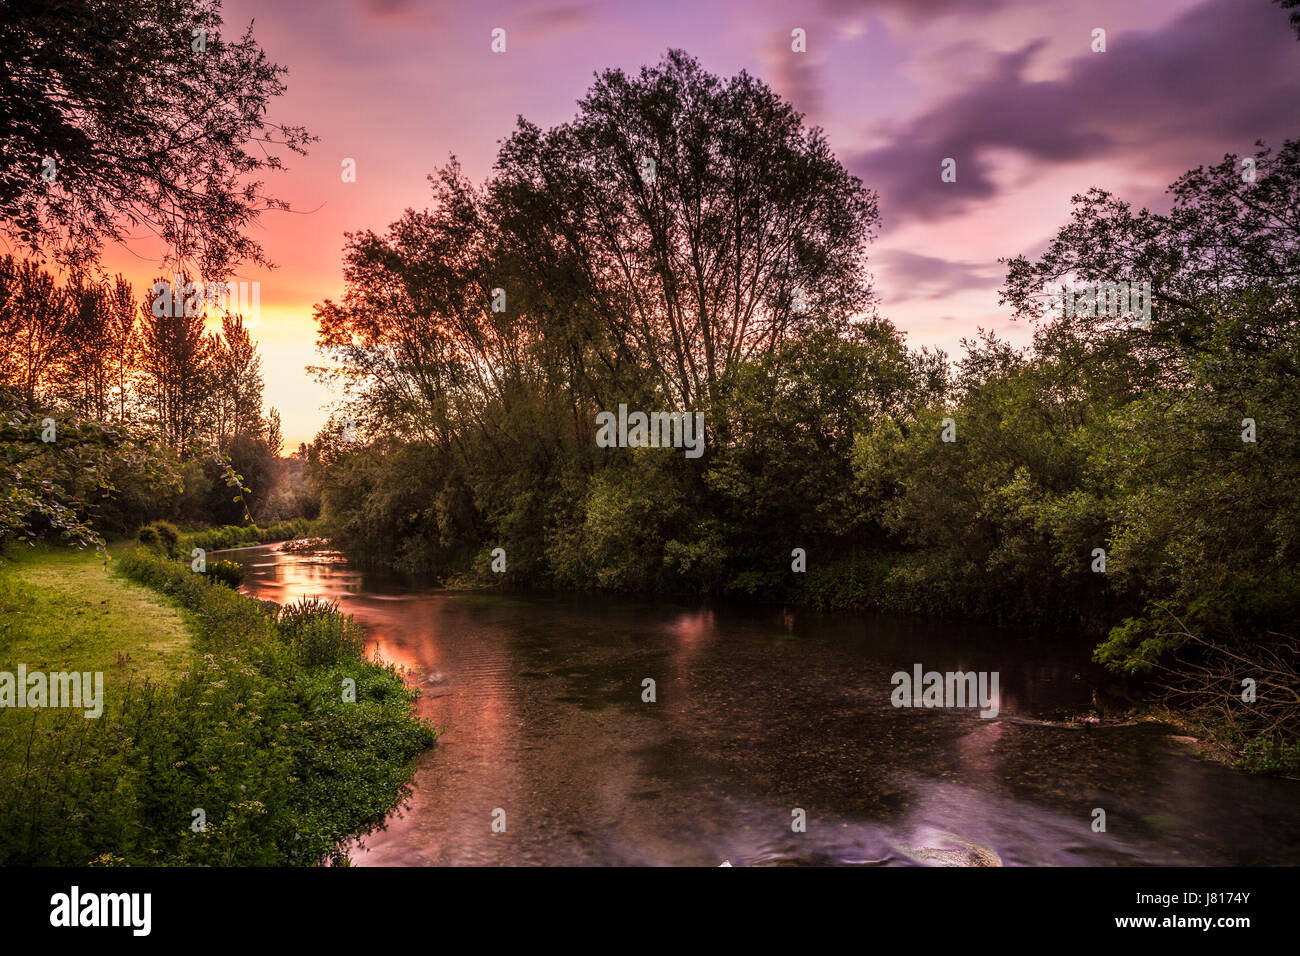 A colourful and dramatic sunrise over the River Kennet in Wiltshire. Stock Photo